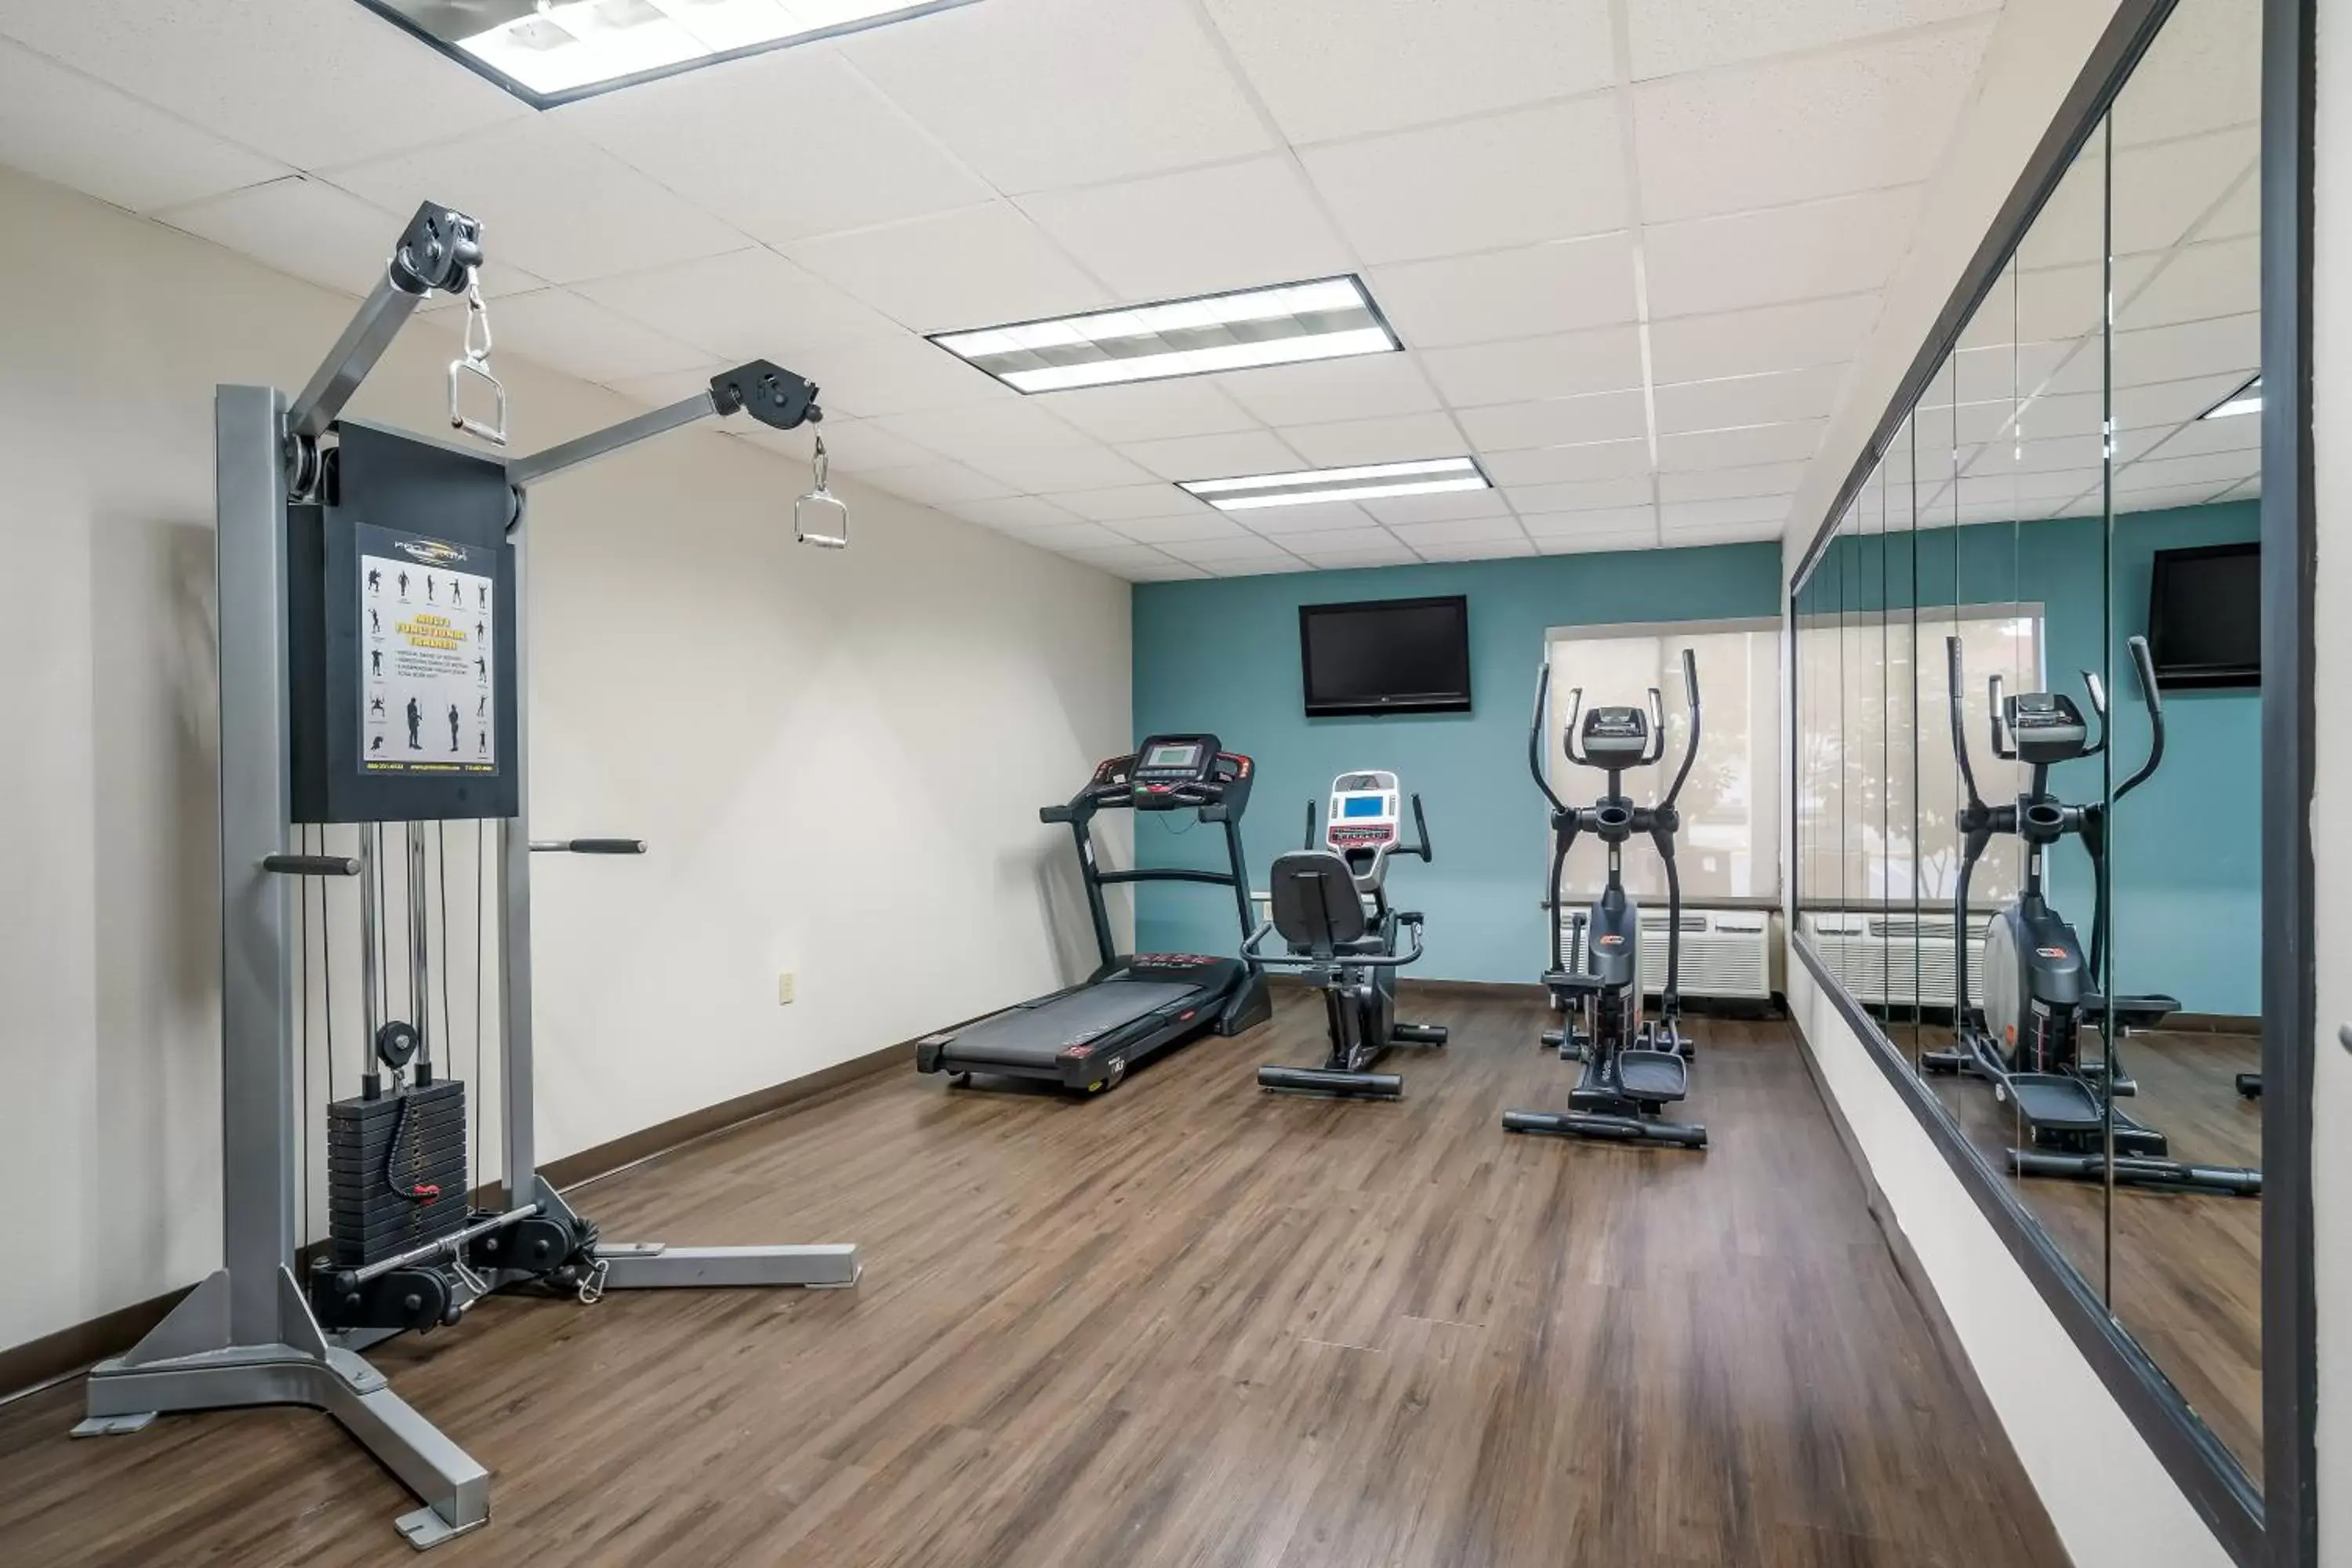 Fitness centre/facilities, Fitness Center/Facilities in Quality Inn Jacksonville near Camp Lejeune